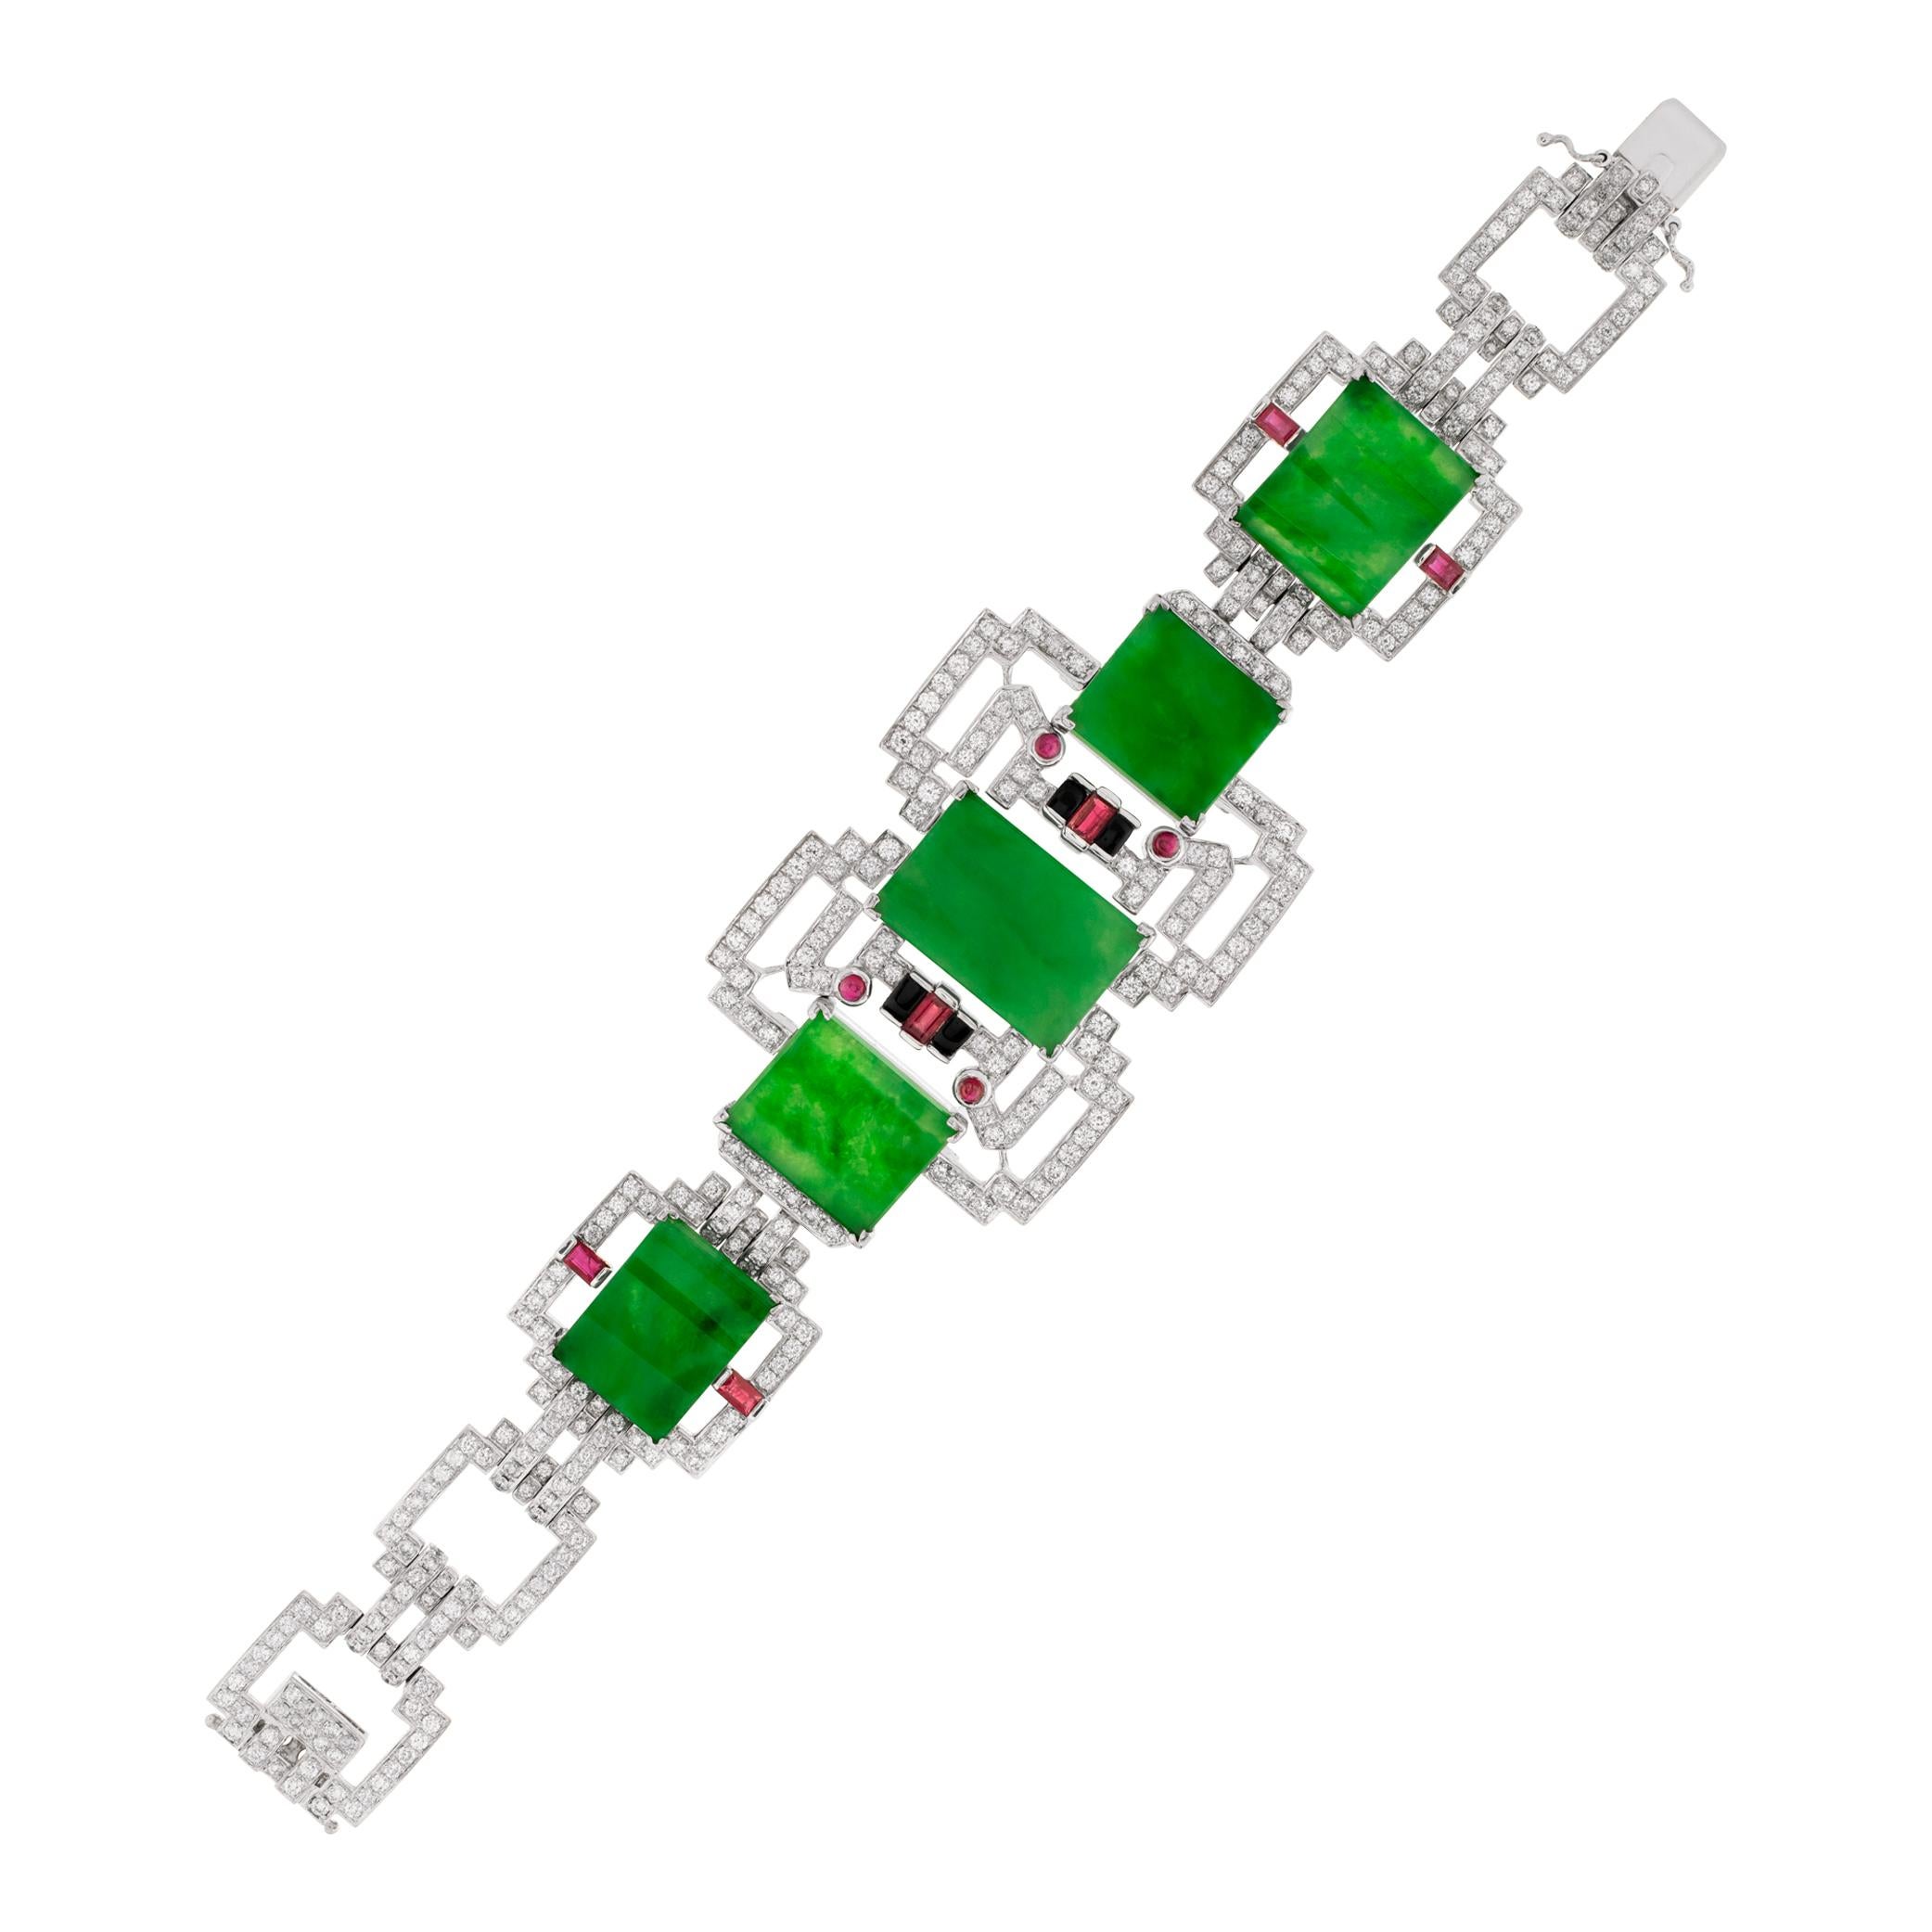 Art Deco inspired Jade and diamonds bracelet with rubies and onyx accents, set in 18k white gold. Round brilliant cut diamonds total approx. weight: 7.00 carats, estimate G-H color, VS clarity. Rectangular & square Jade total approx. weight 7.00